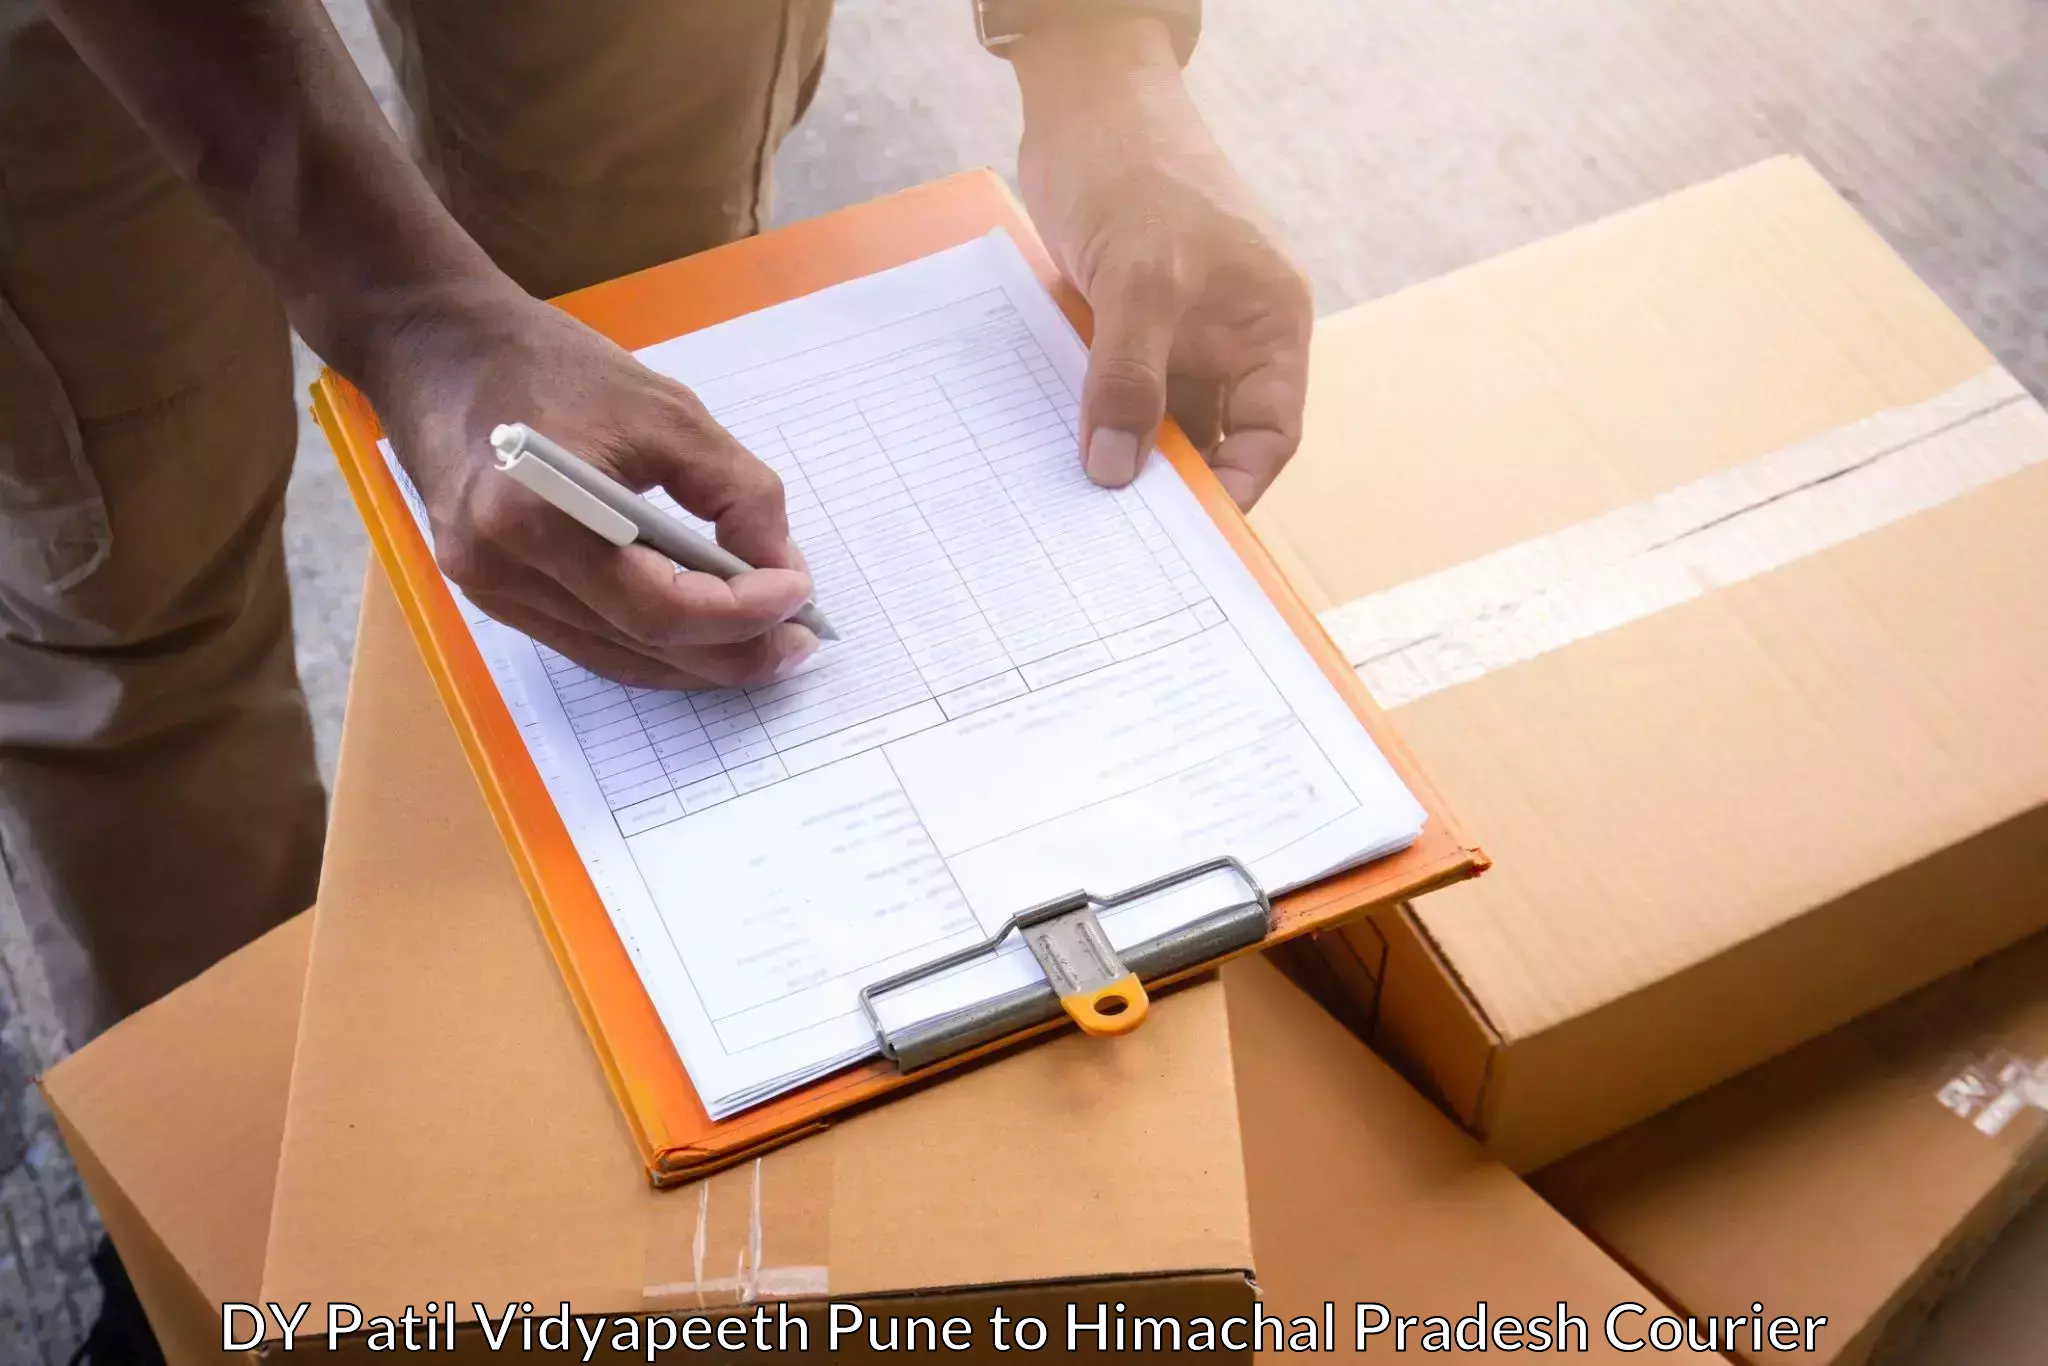 Package delivery network DY Patil Vidyapeeth Pune to Dheera